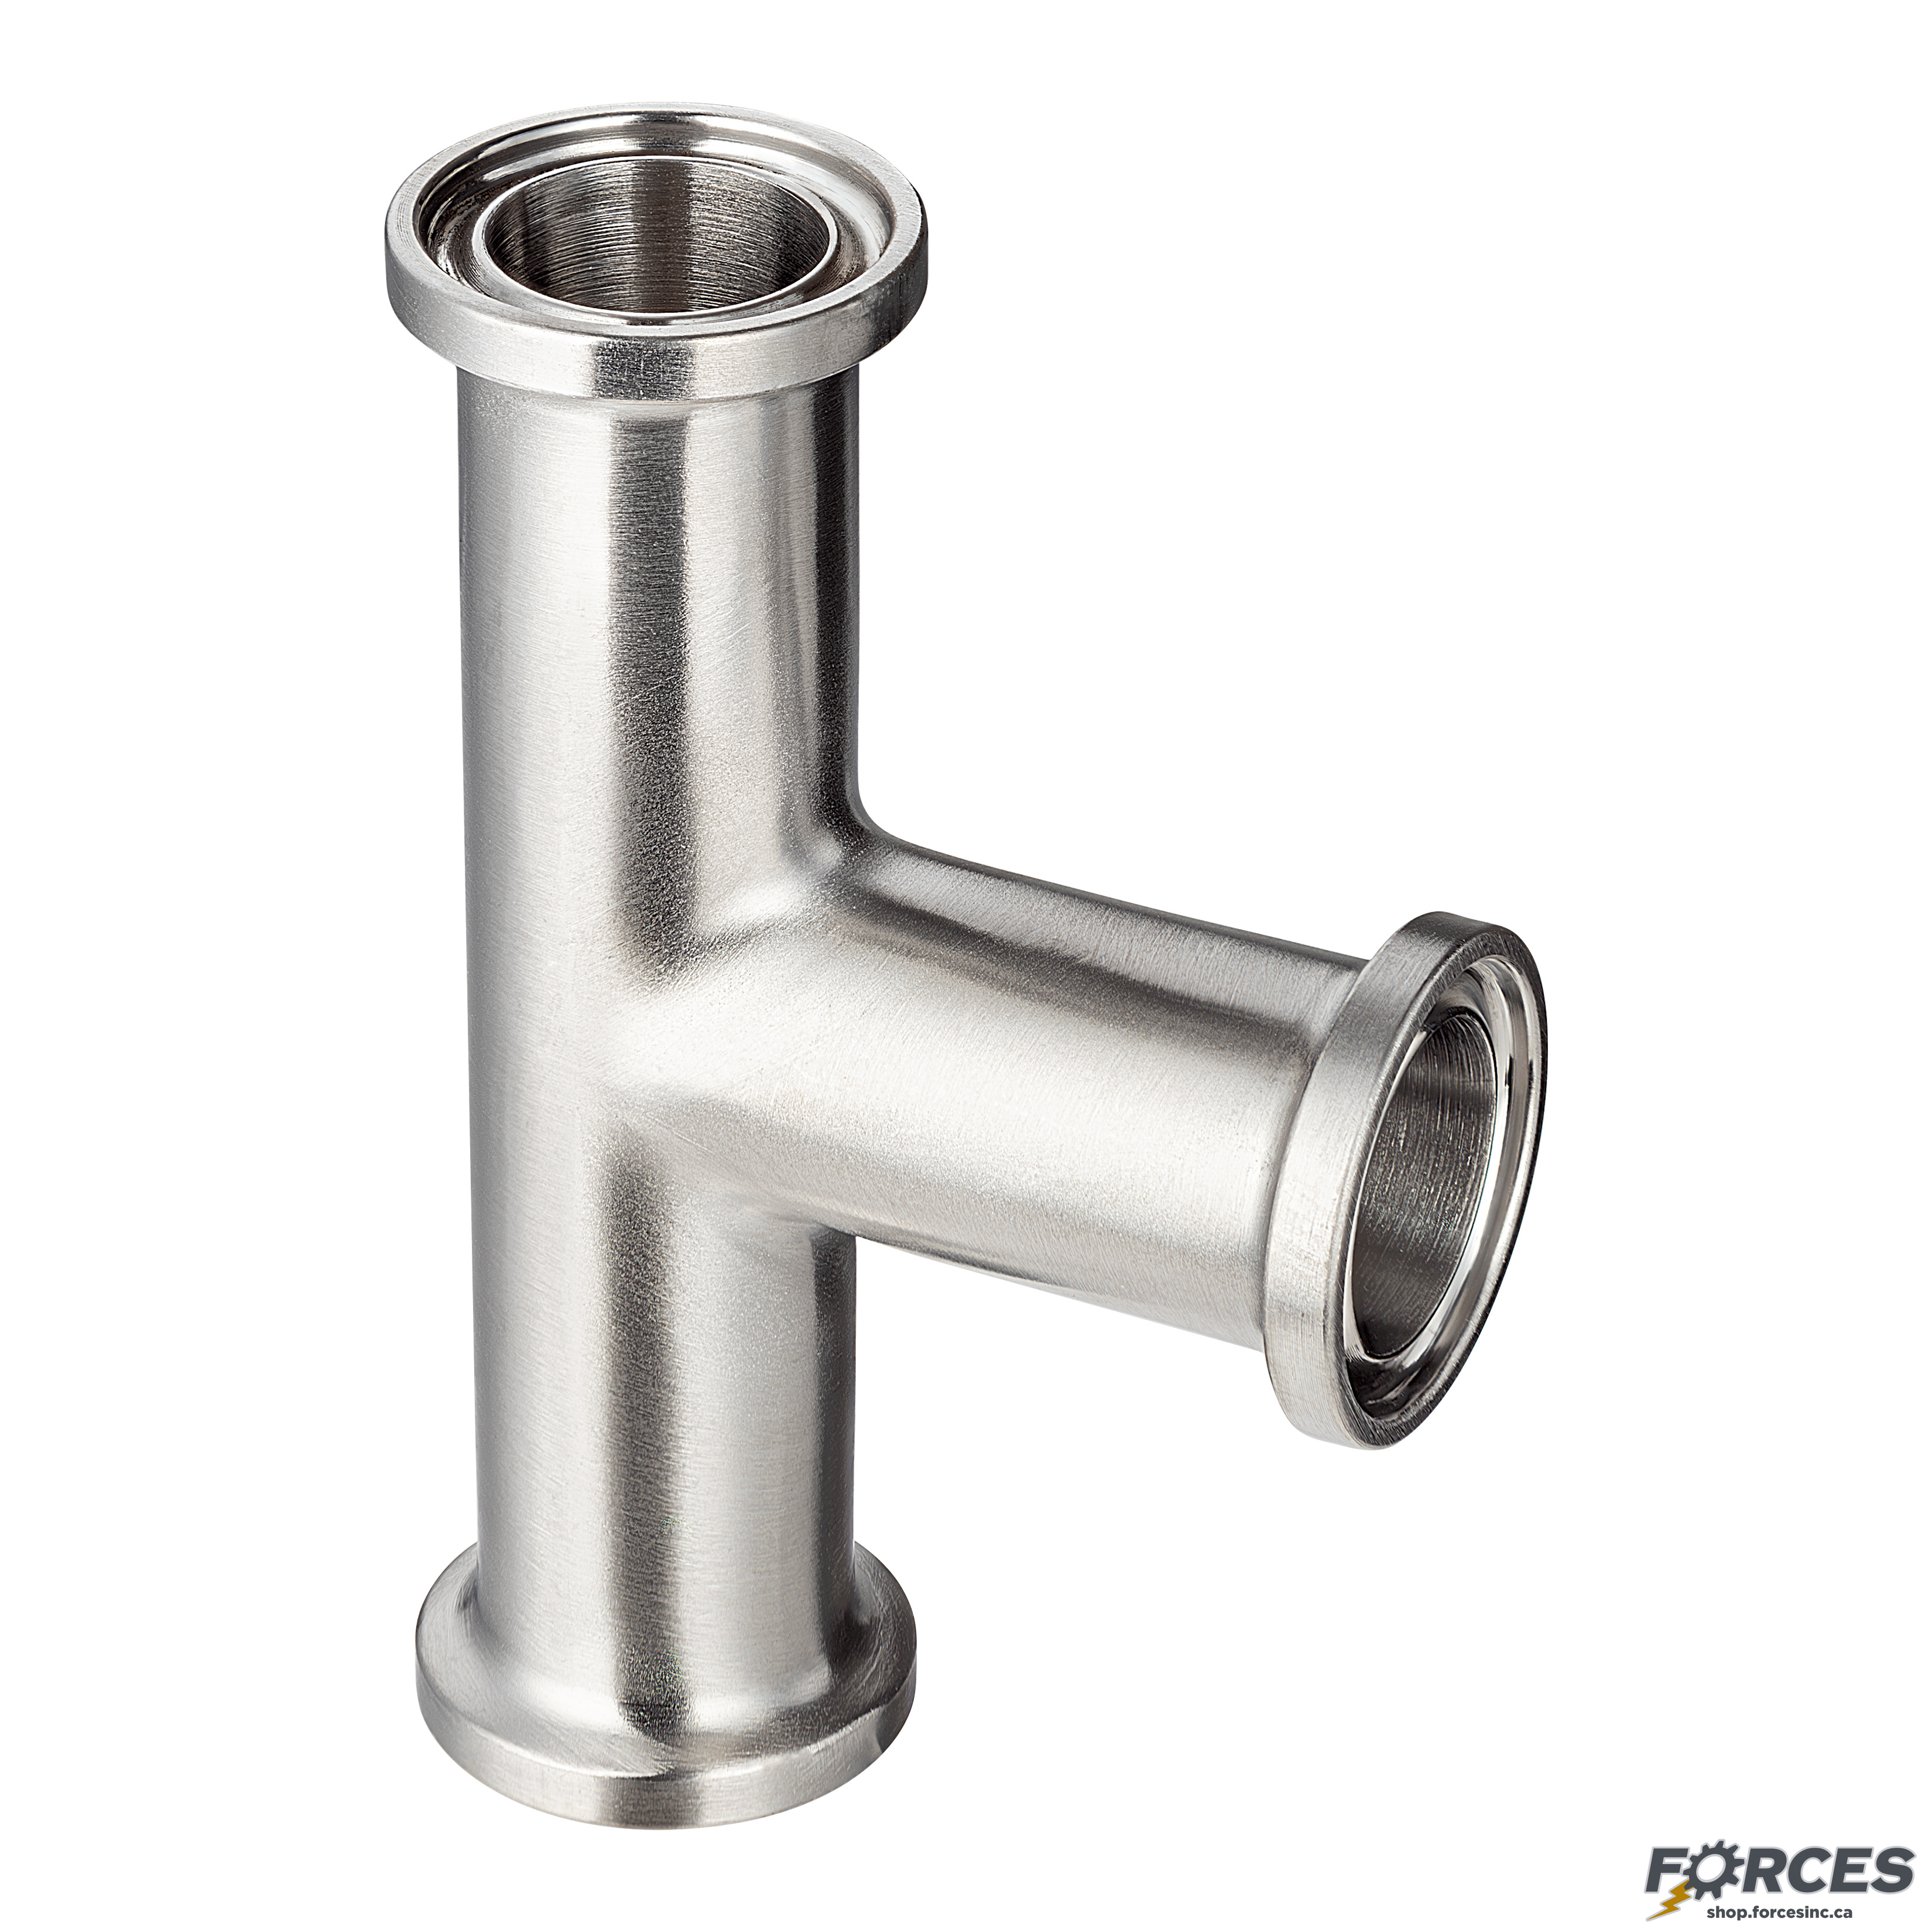 1-1/2" Tri-Clamp Short Tee - Stainless Steel 316 - Forces Inc